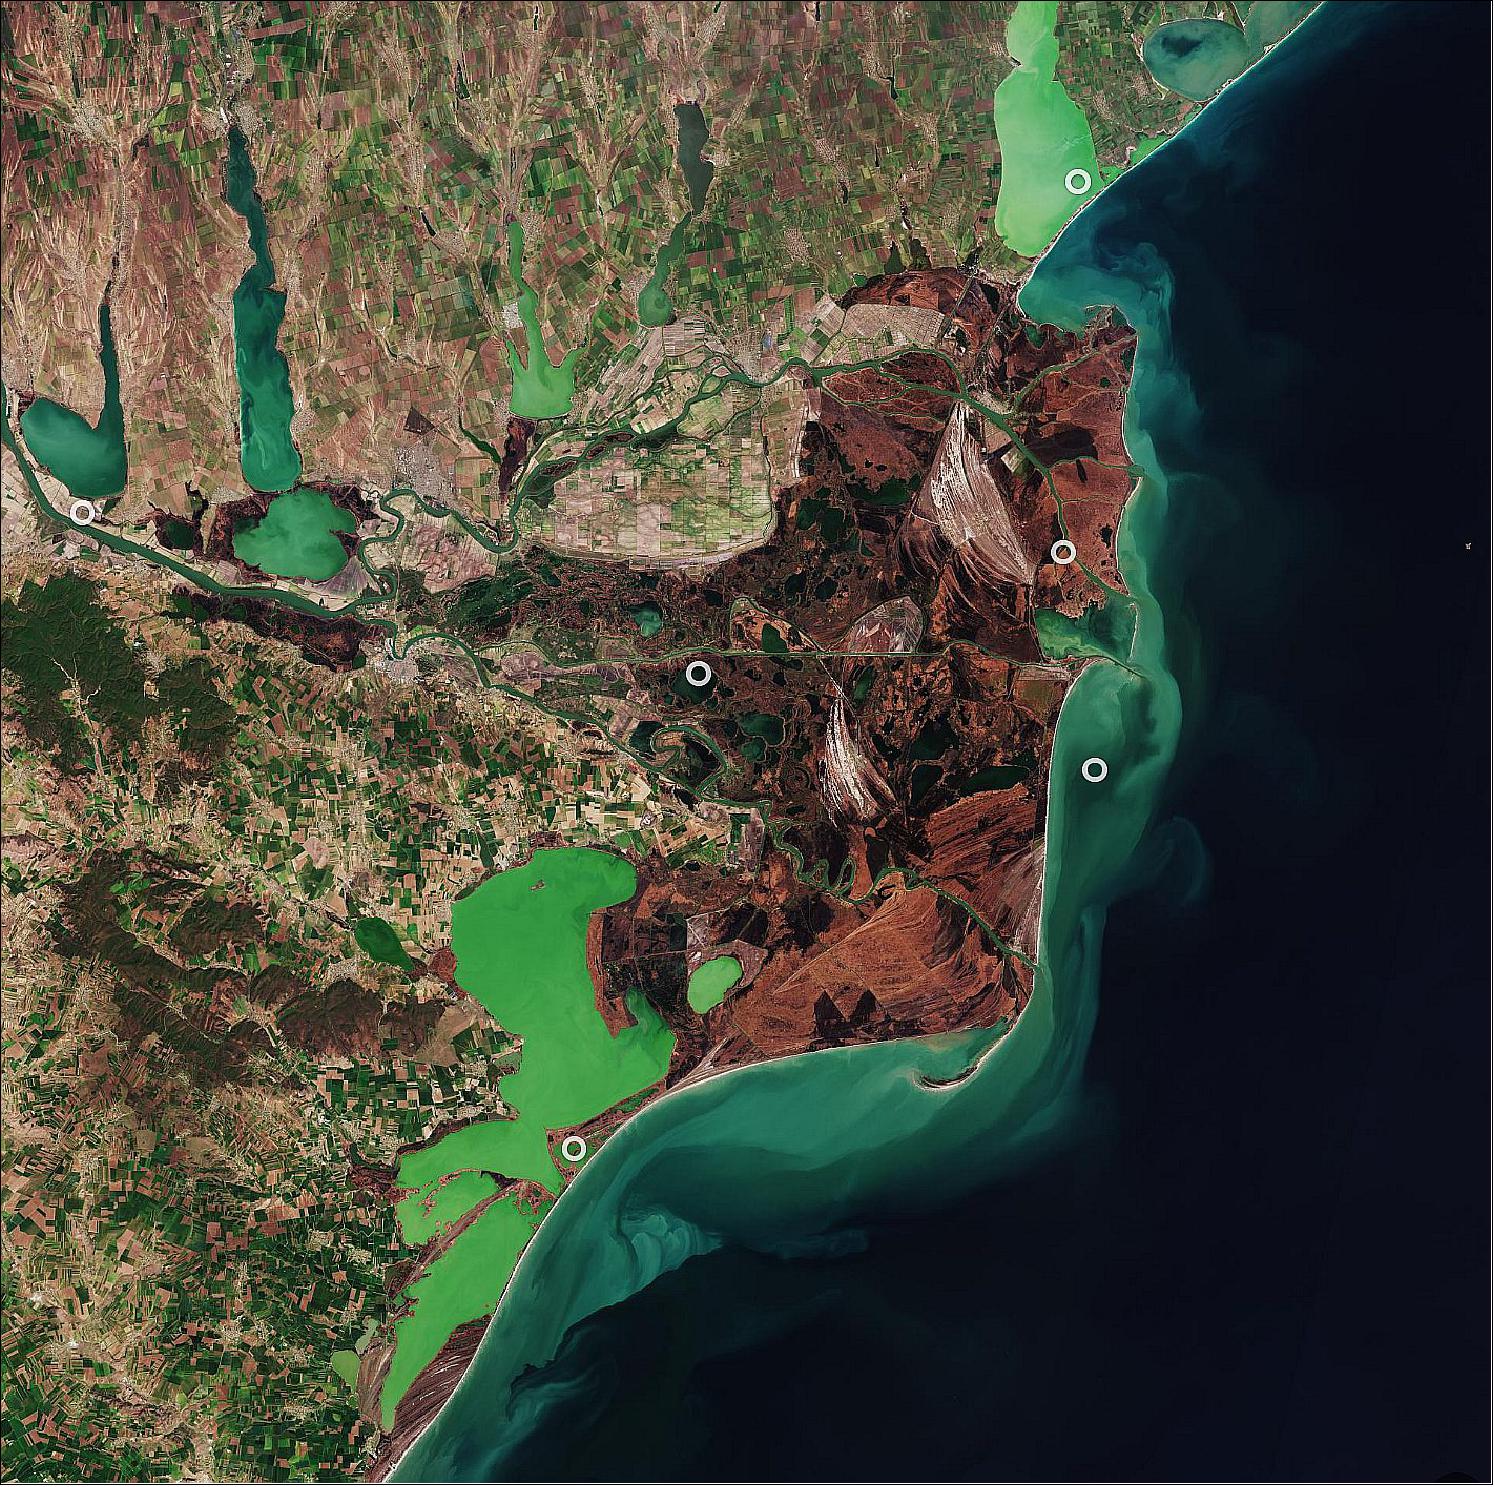 Figure 26: In this true-color image, captured in April 2020, the vast reed beds can be seen in shades of brown which is typical during this time of year. The Danube is visible (in the left of the image) before splitting into the various channels and branches that flow through the reeds and grassland before reaching the Black Sea. The distinct light-green colors in the sea are likely due to sediment being carried by the river. This image is also featured on the Earth from Space video program (image credit: ESA, the image contains modified Copernicus Sentinel data (2020), processed by ESA, CC BY-SA 3.0 IGO)